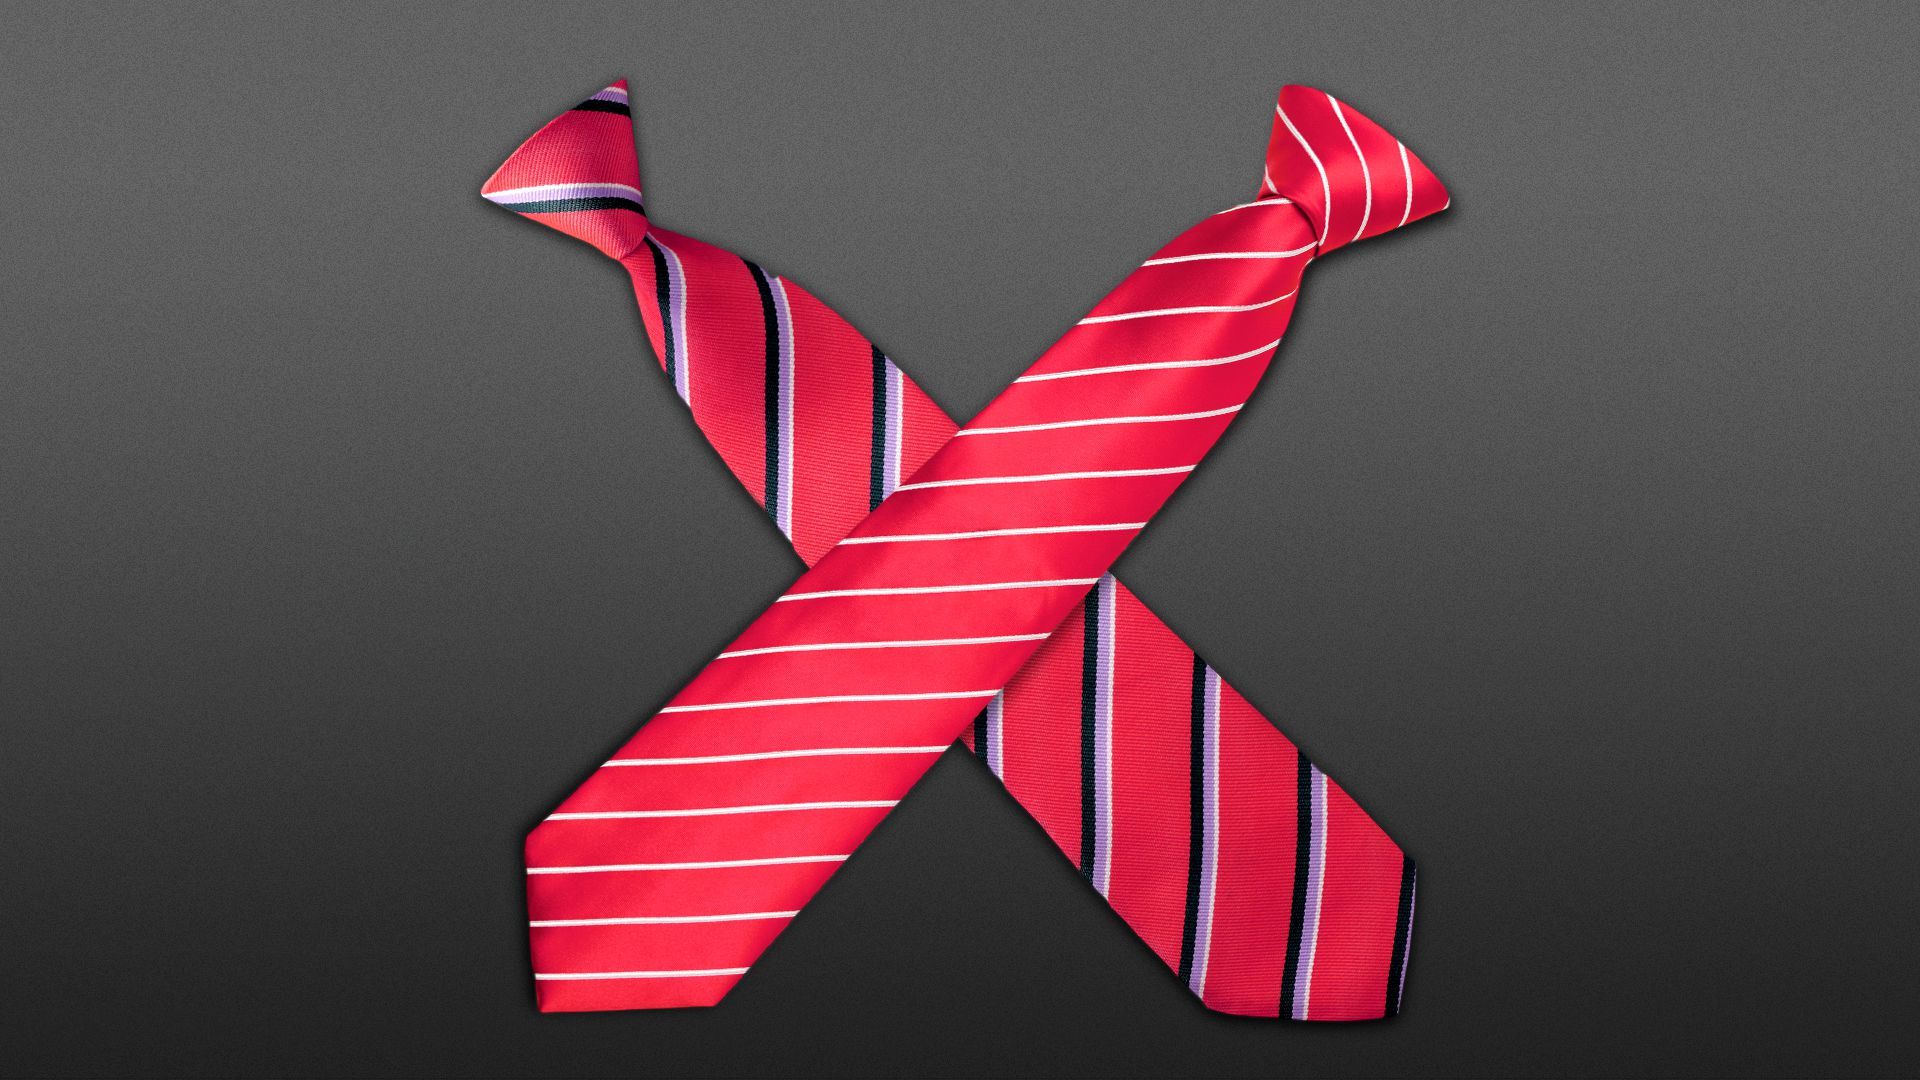 Illustration of two neckties crossing to form an "x"